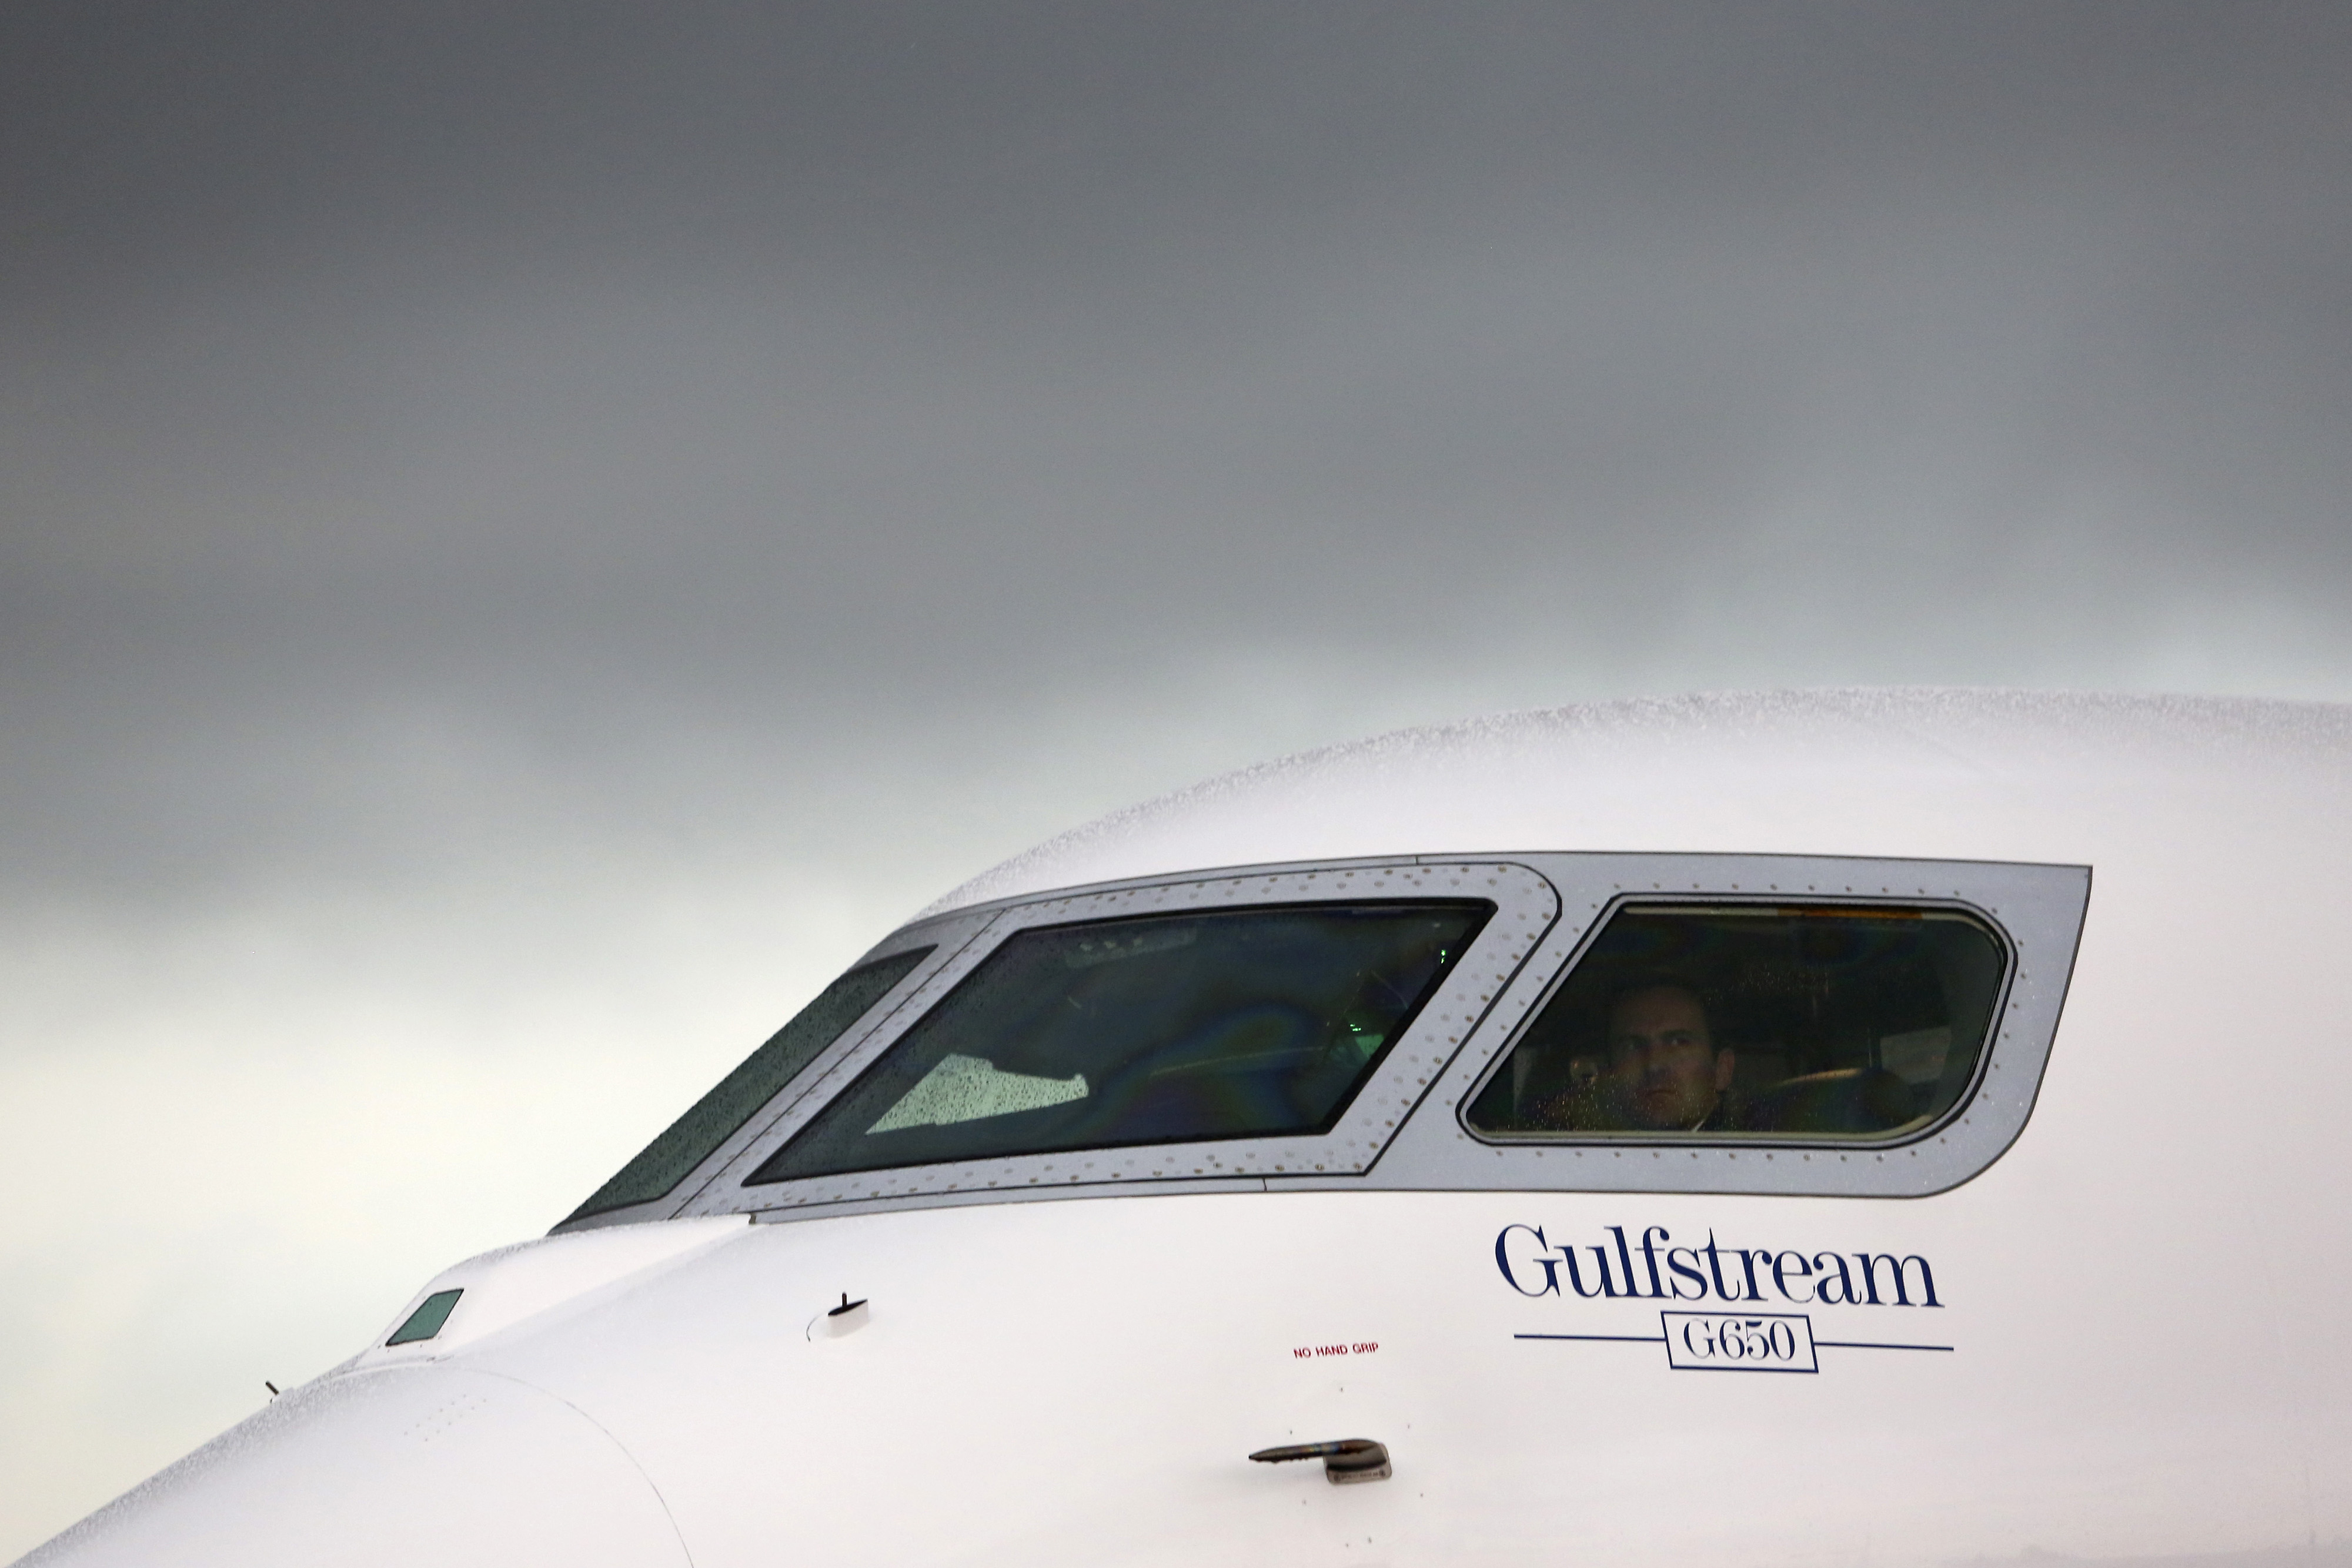 A logo sits beneath the cockpit window of a Gulfstream G650 business jet, manufactured by General Dynamics Corp., on the first day of the Paris Air Show in Paris on June 17, 2013. (Bloomberg via Getty Images)